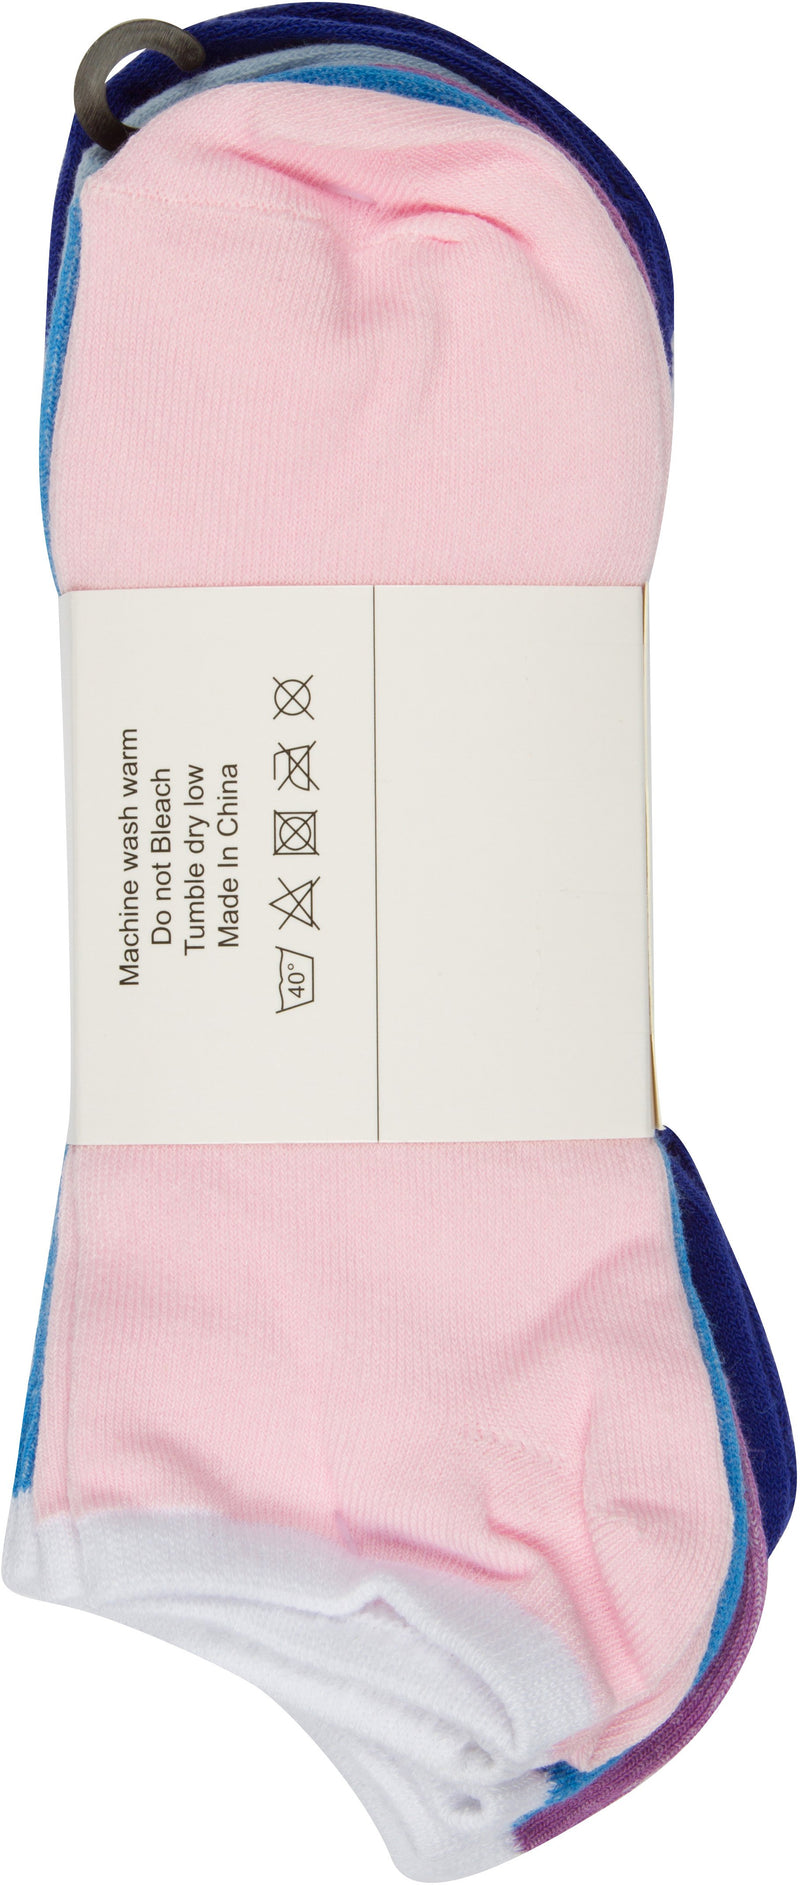 Sakkas Women's Combed Cotton Ankle Socks Assorted 6-Pack